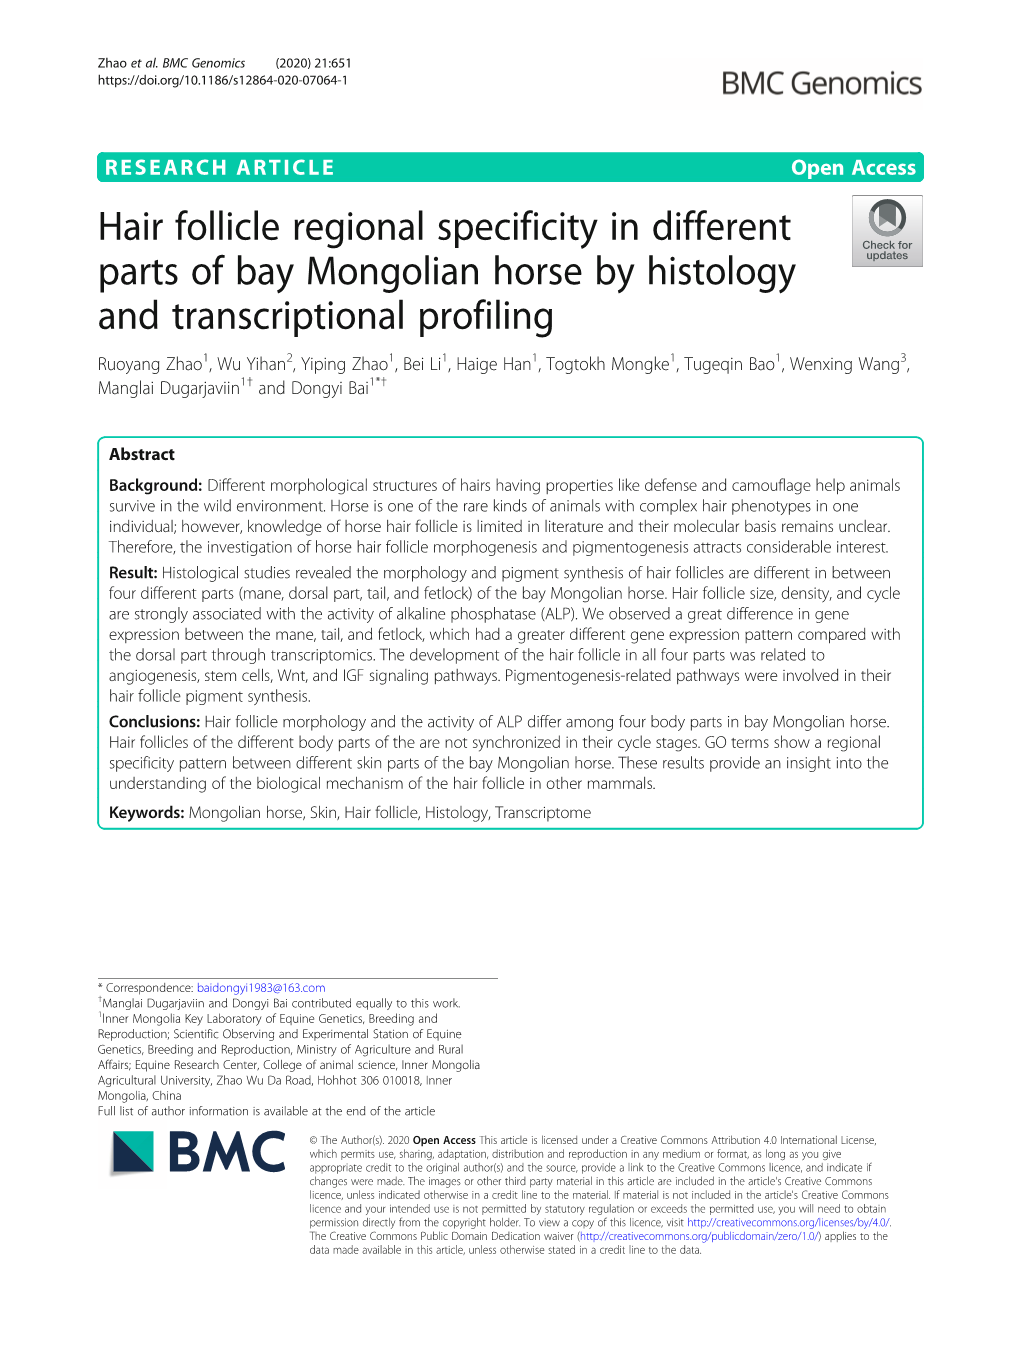 Hair Follicle Regional Specificity in Different Parts of Bay Mongolian